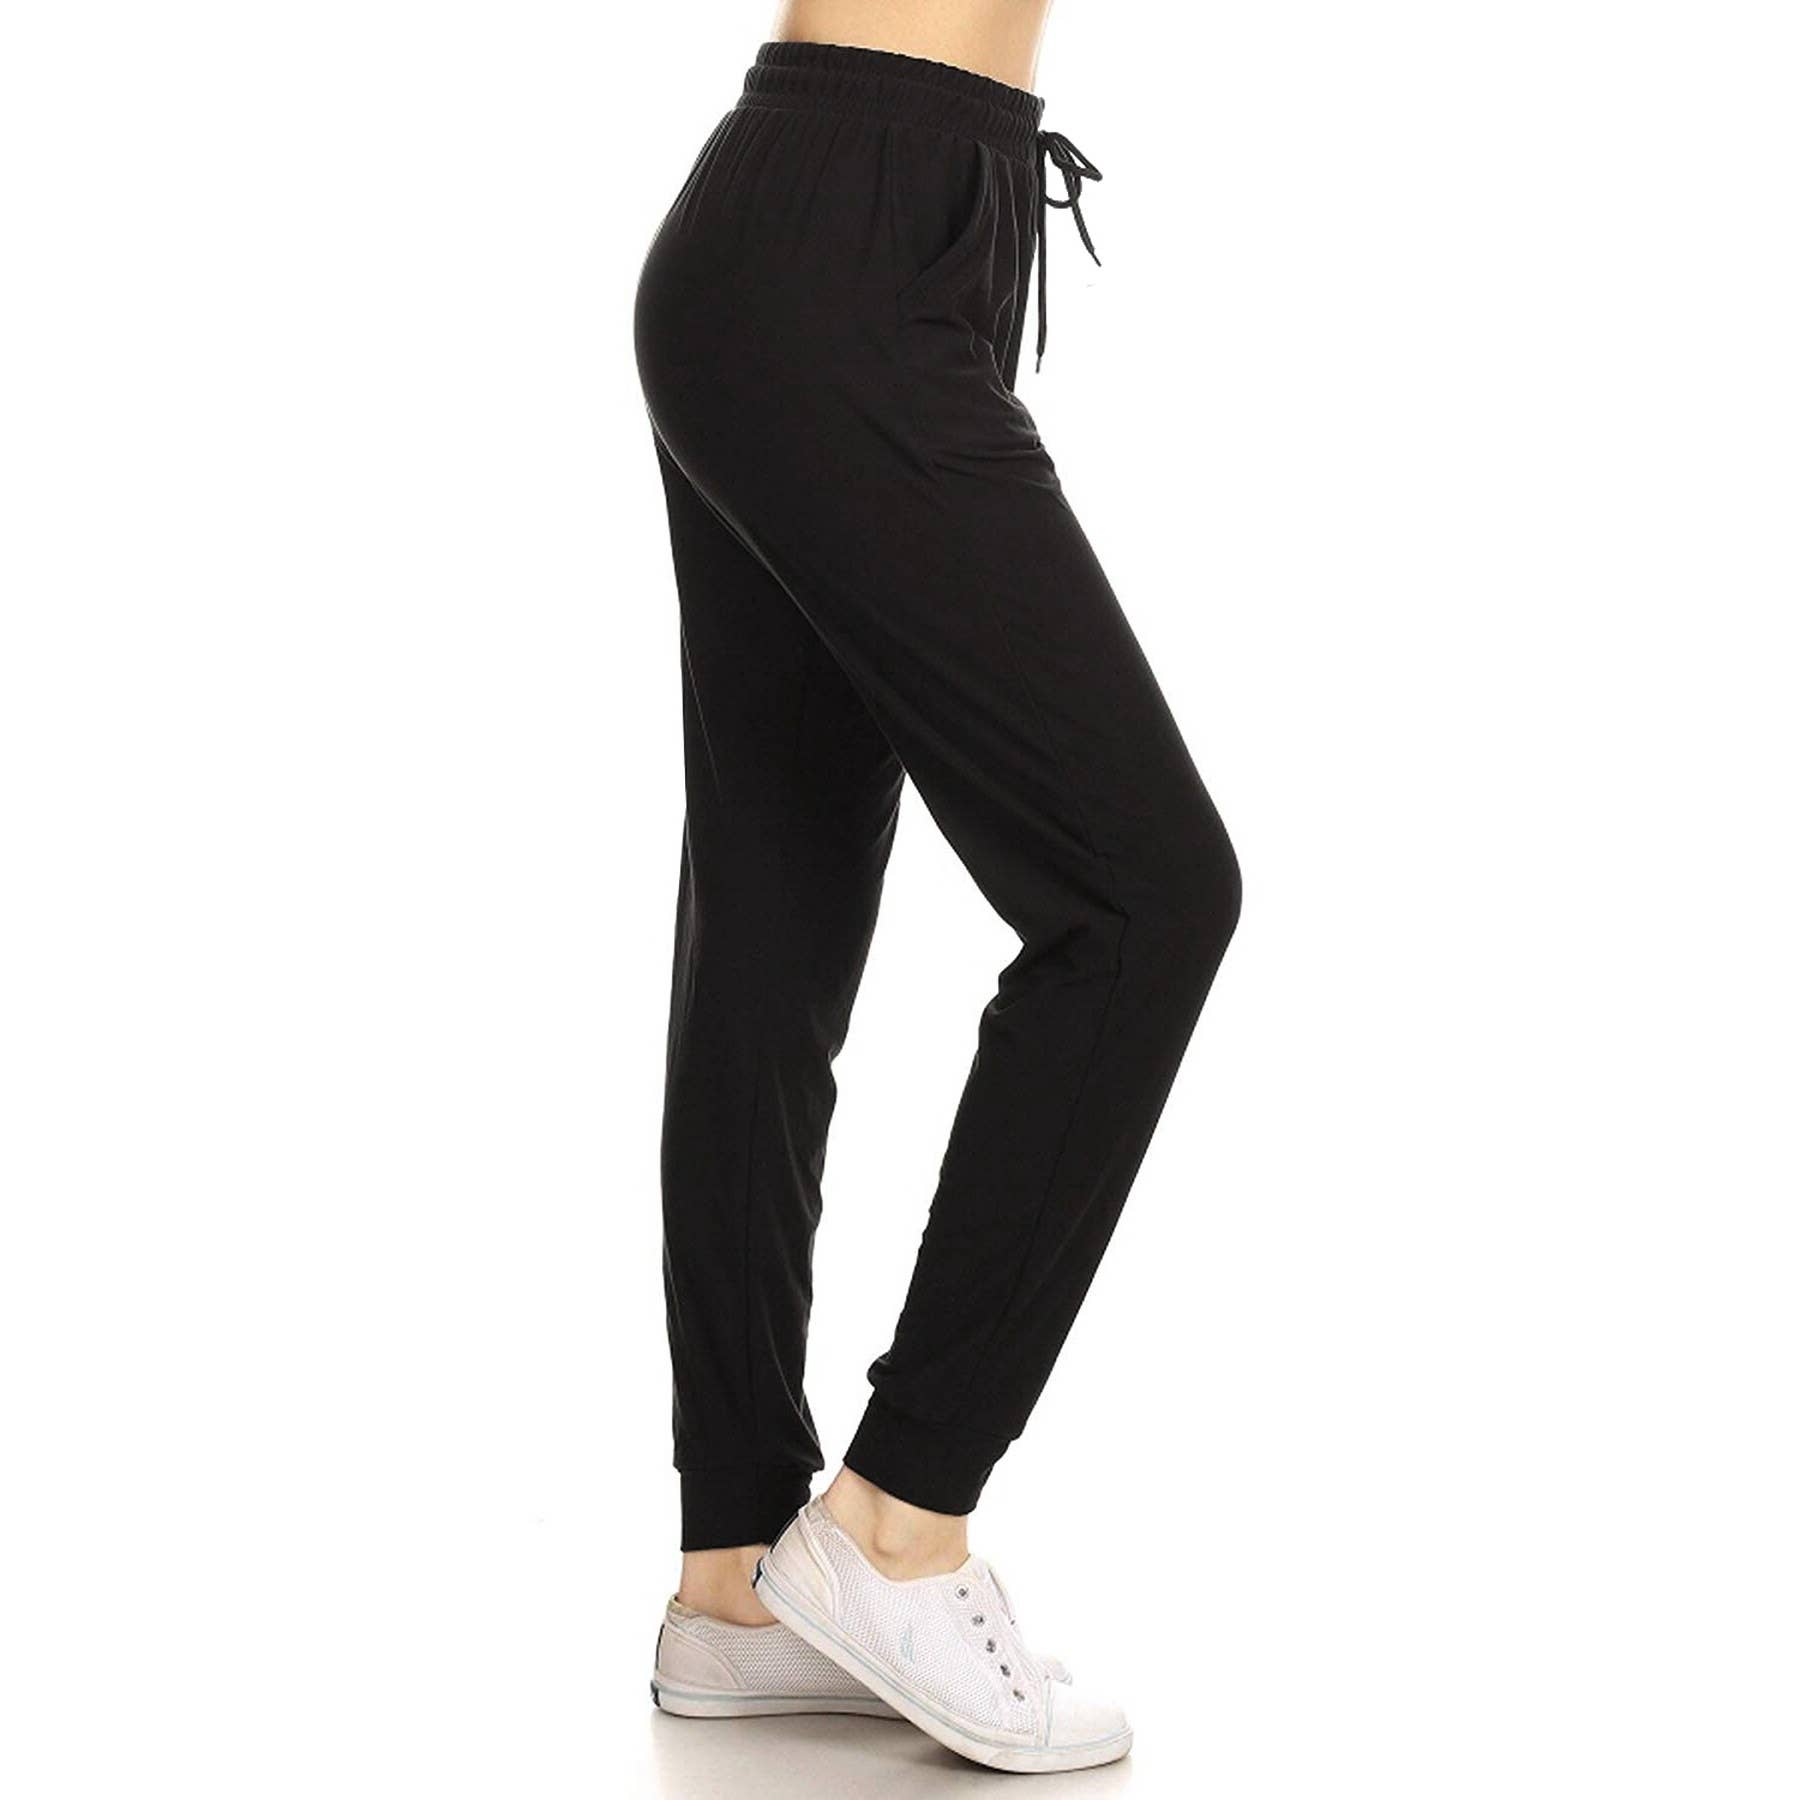 Buy Jockey AA01 Leggings With Concealed Side Pocket And Drawstring Closure  Ruby Pink Marl XL Online at Low Prices in India at Bigdeals24x7.com